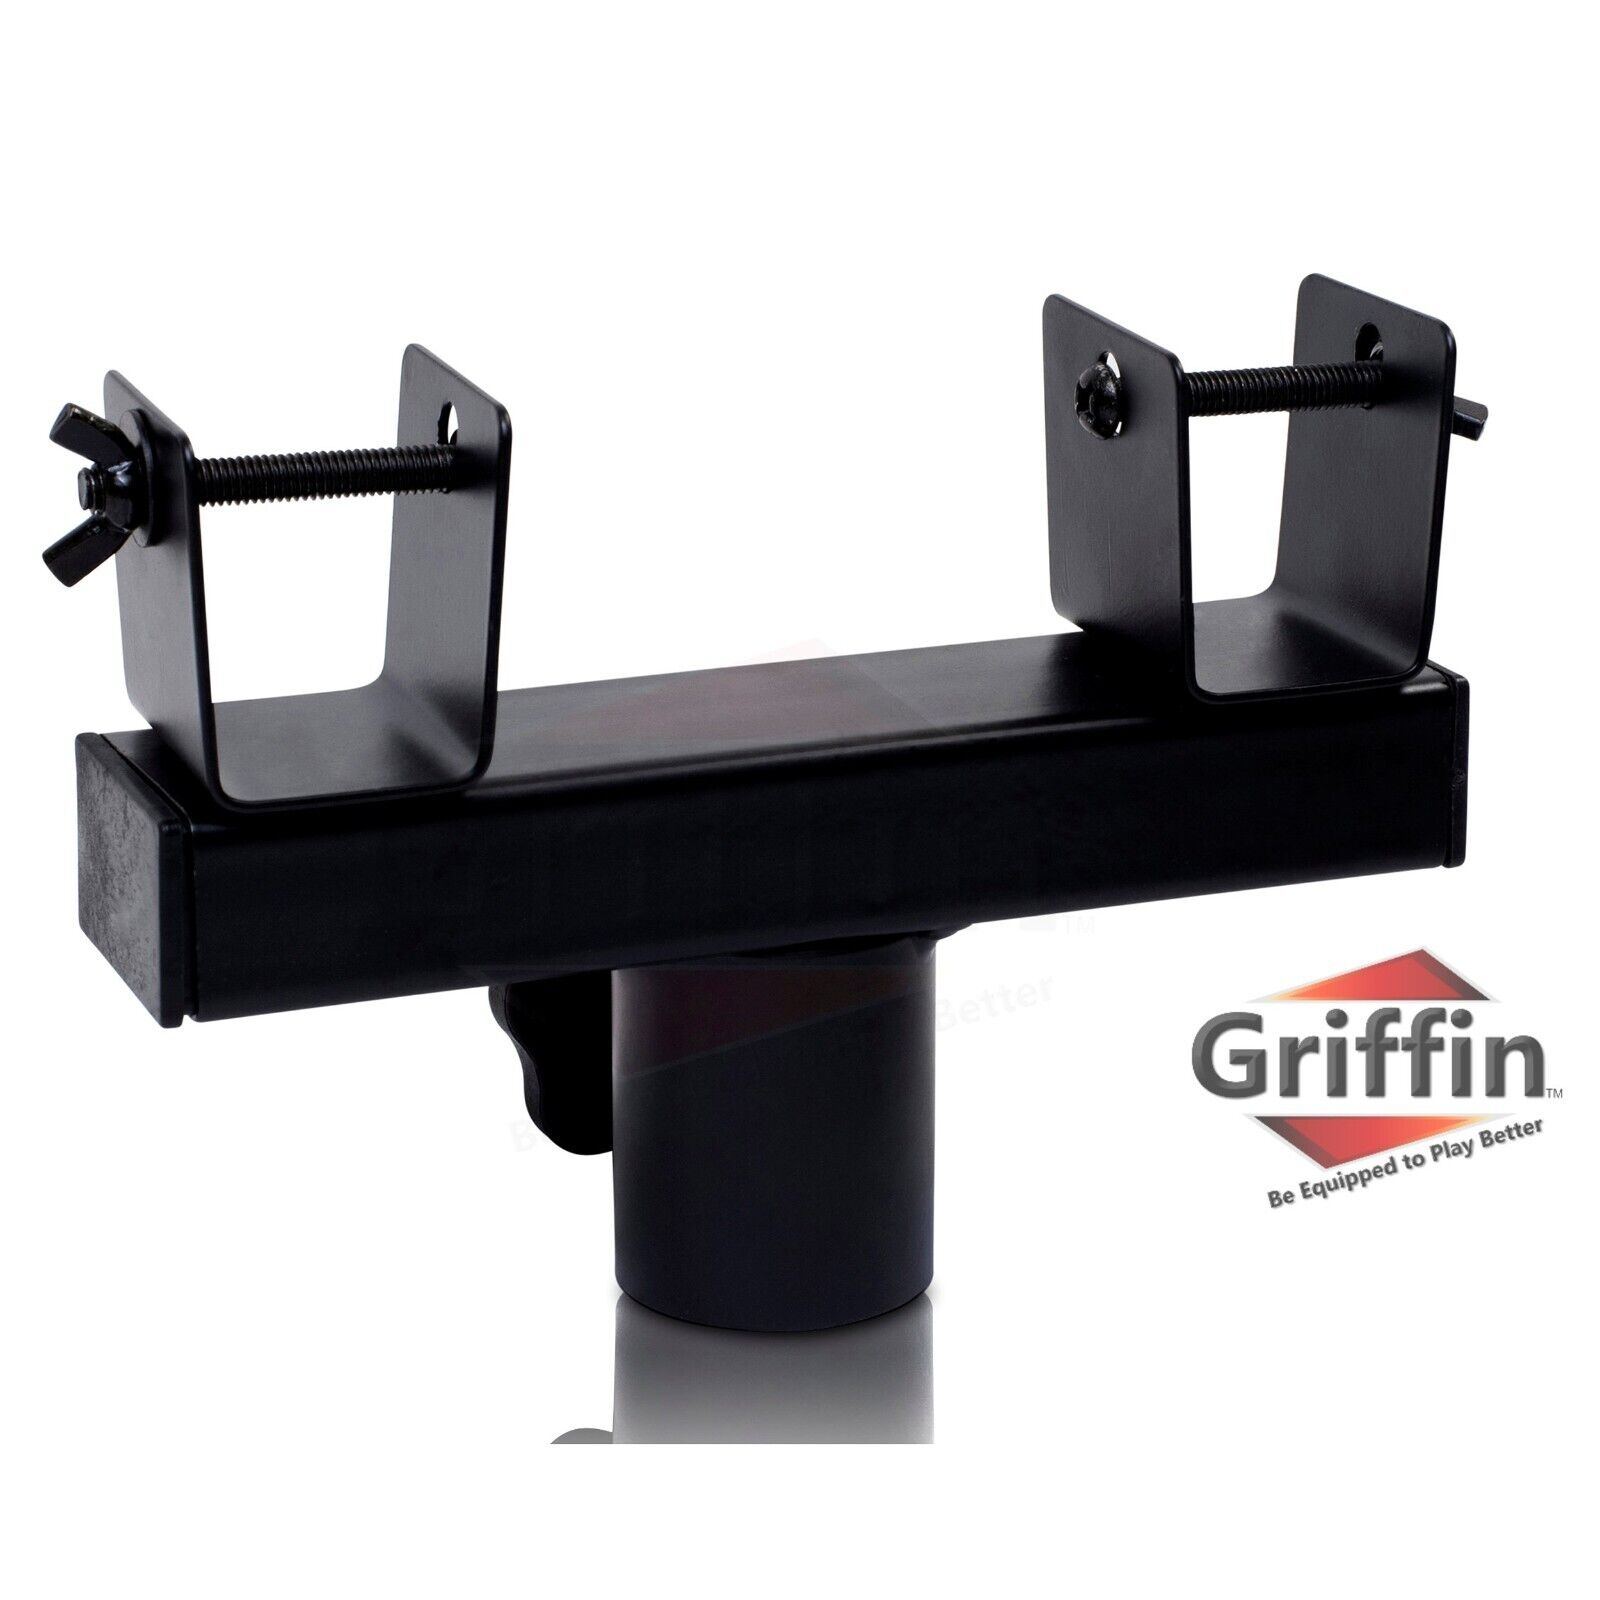 2 PACK Triangle Truss Kit DJ Booth Trussing Section Stage Segment Lighting Stand Griffin LG-2XTrussFF - фотография #9